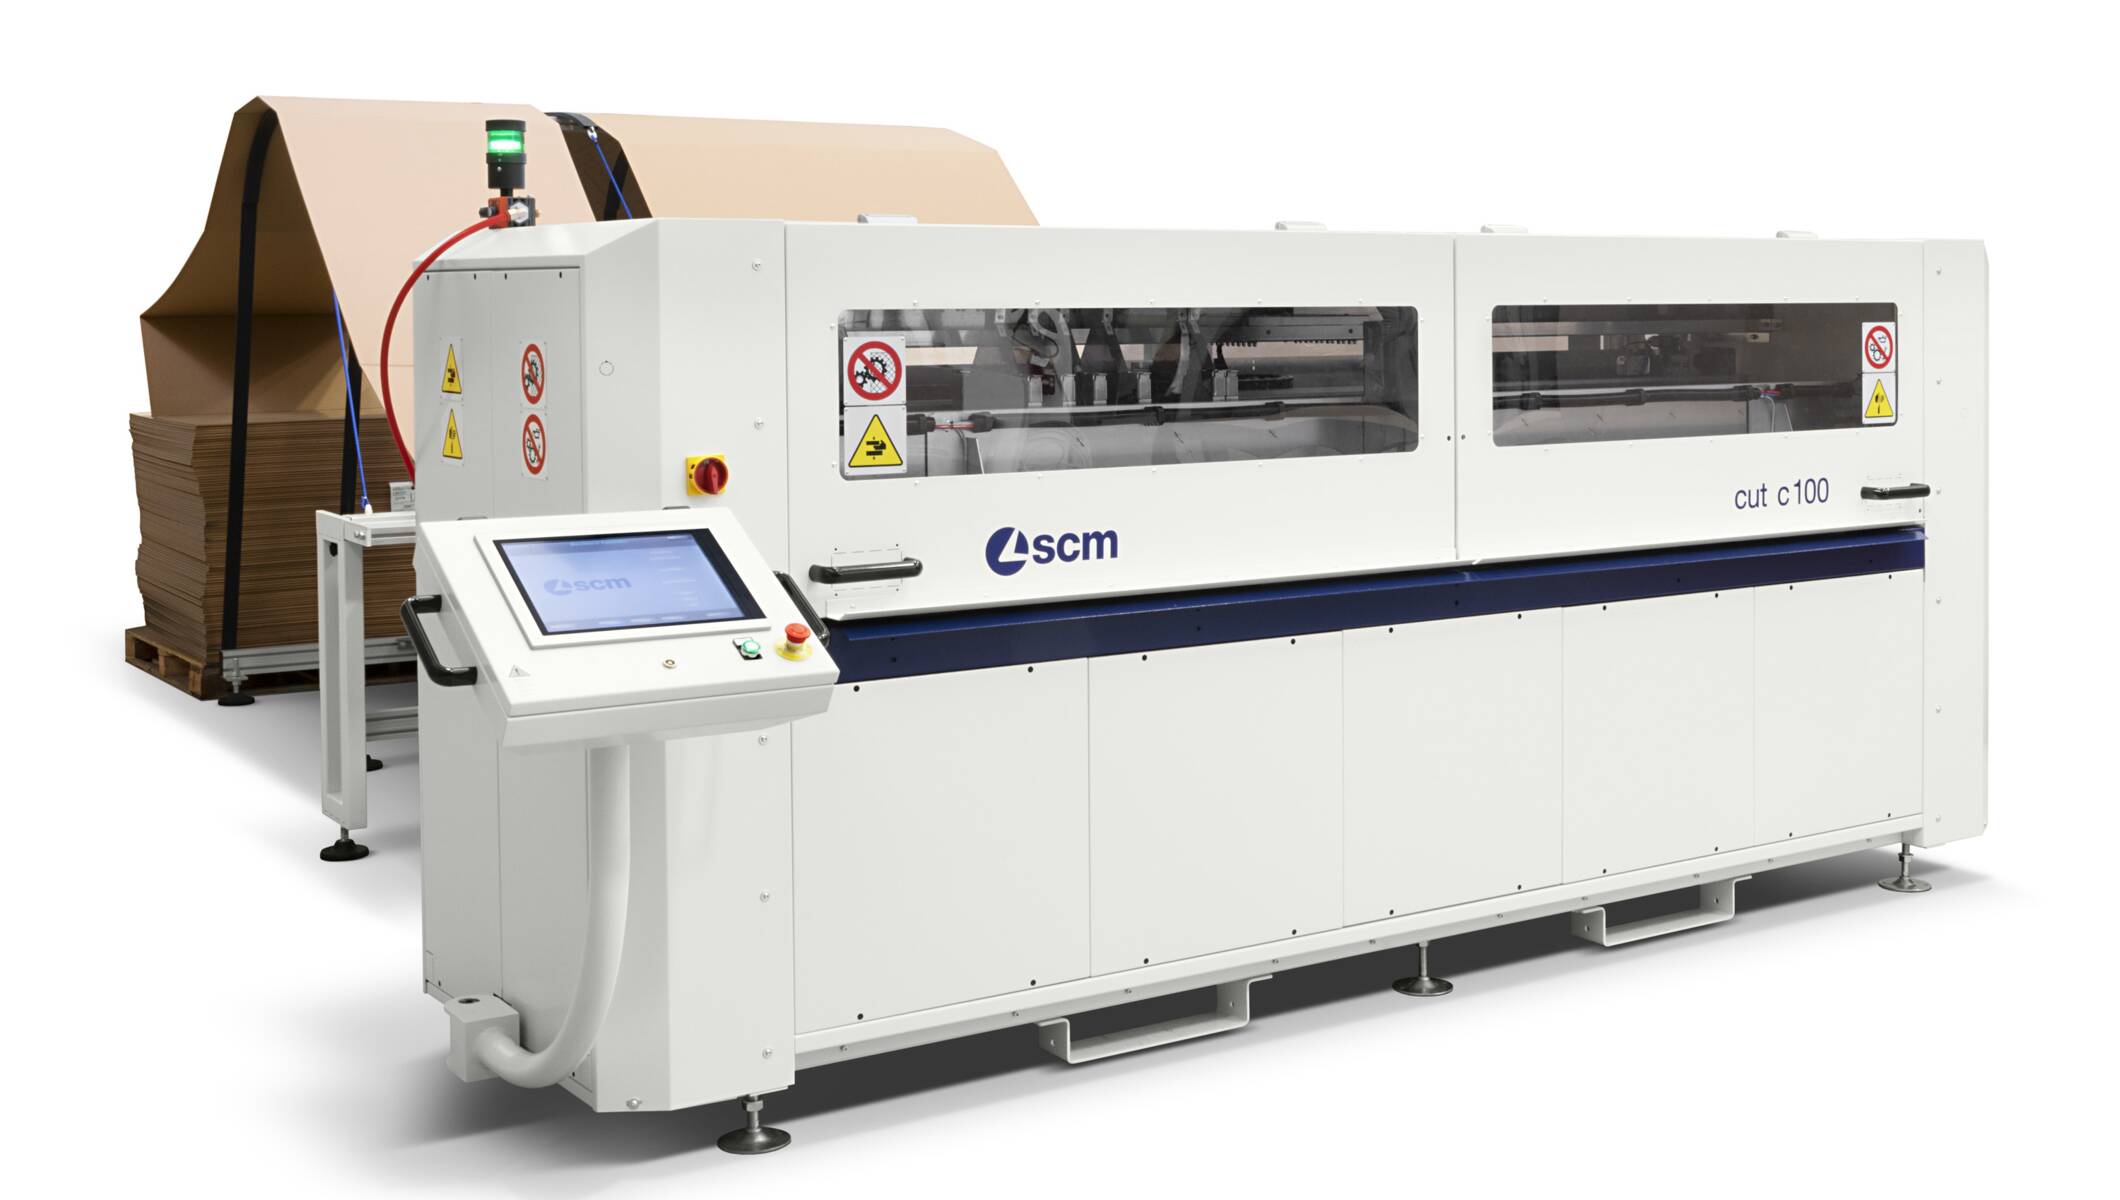 Packaging - Packaging solutions with cardboard - cut c 100